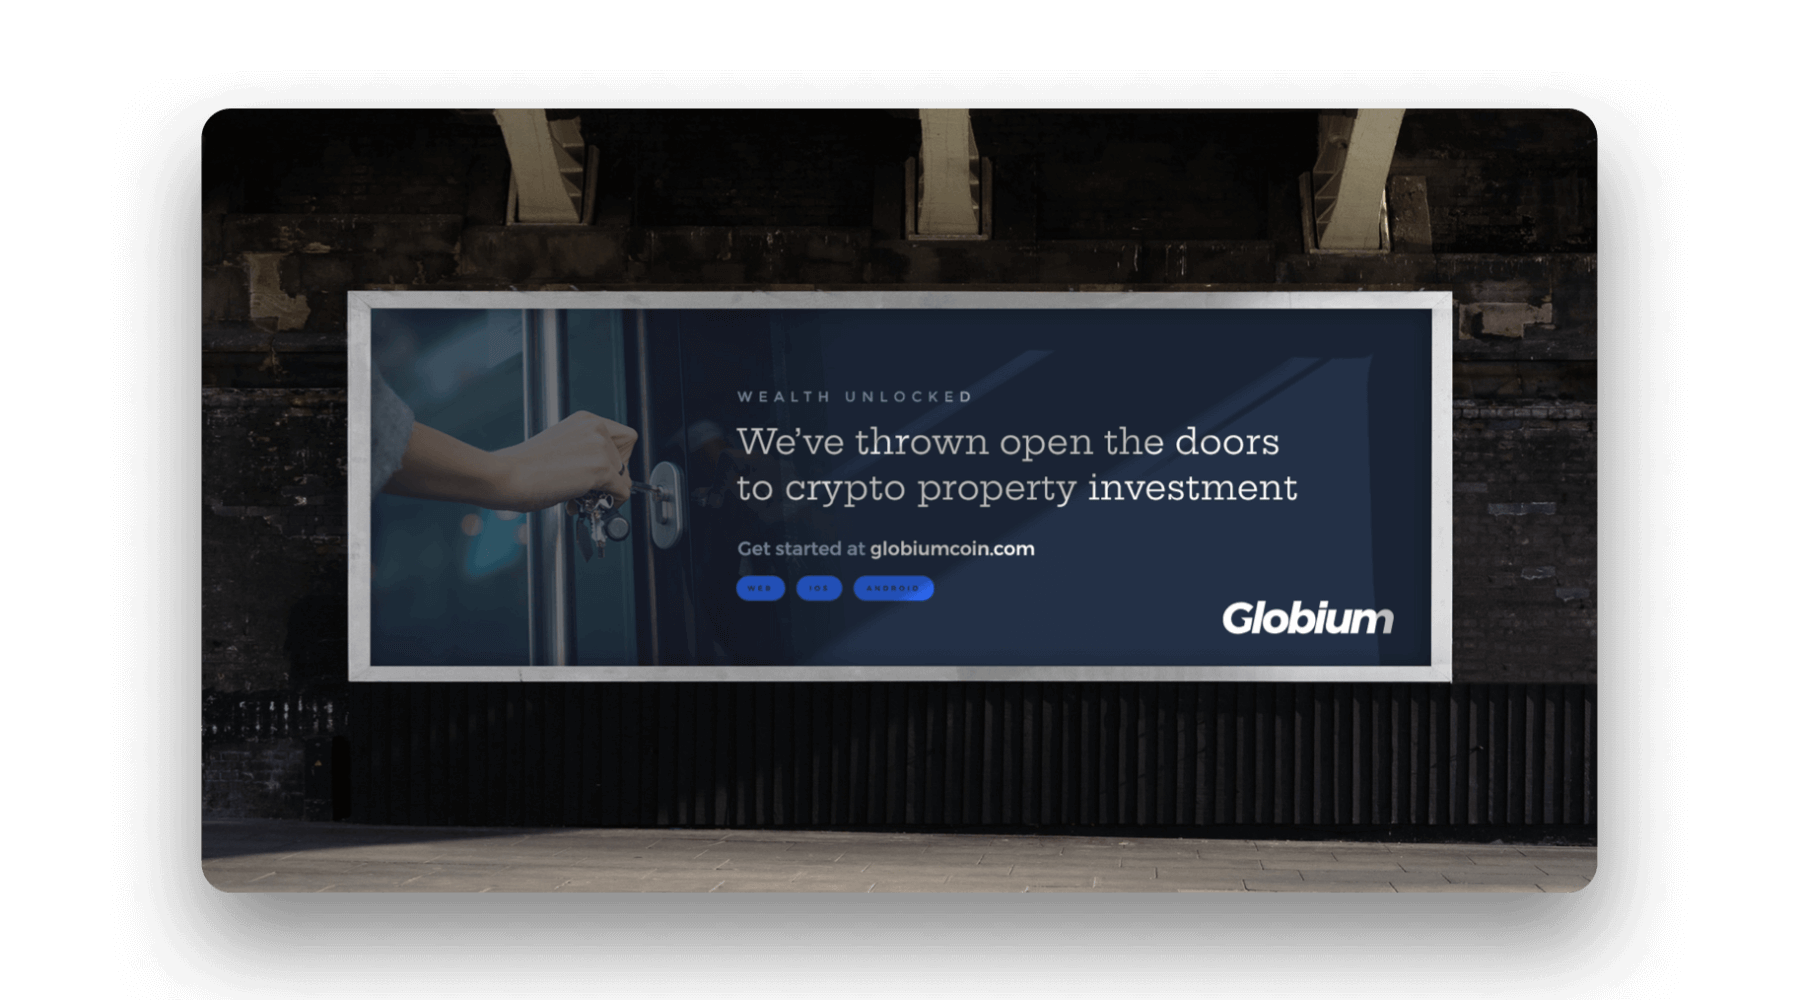 ad concept for Globium by branding agency Ronins